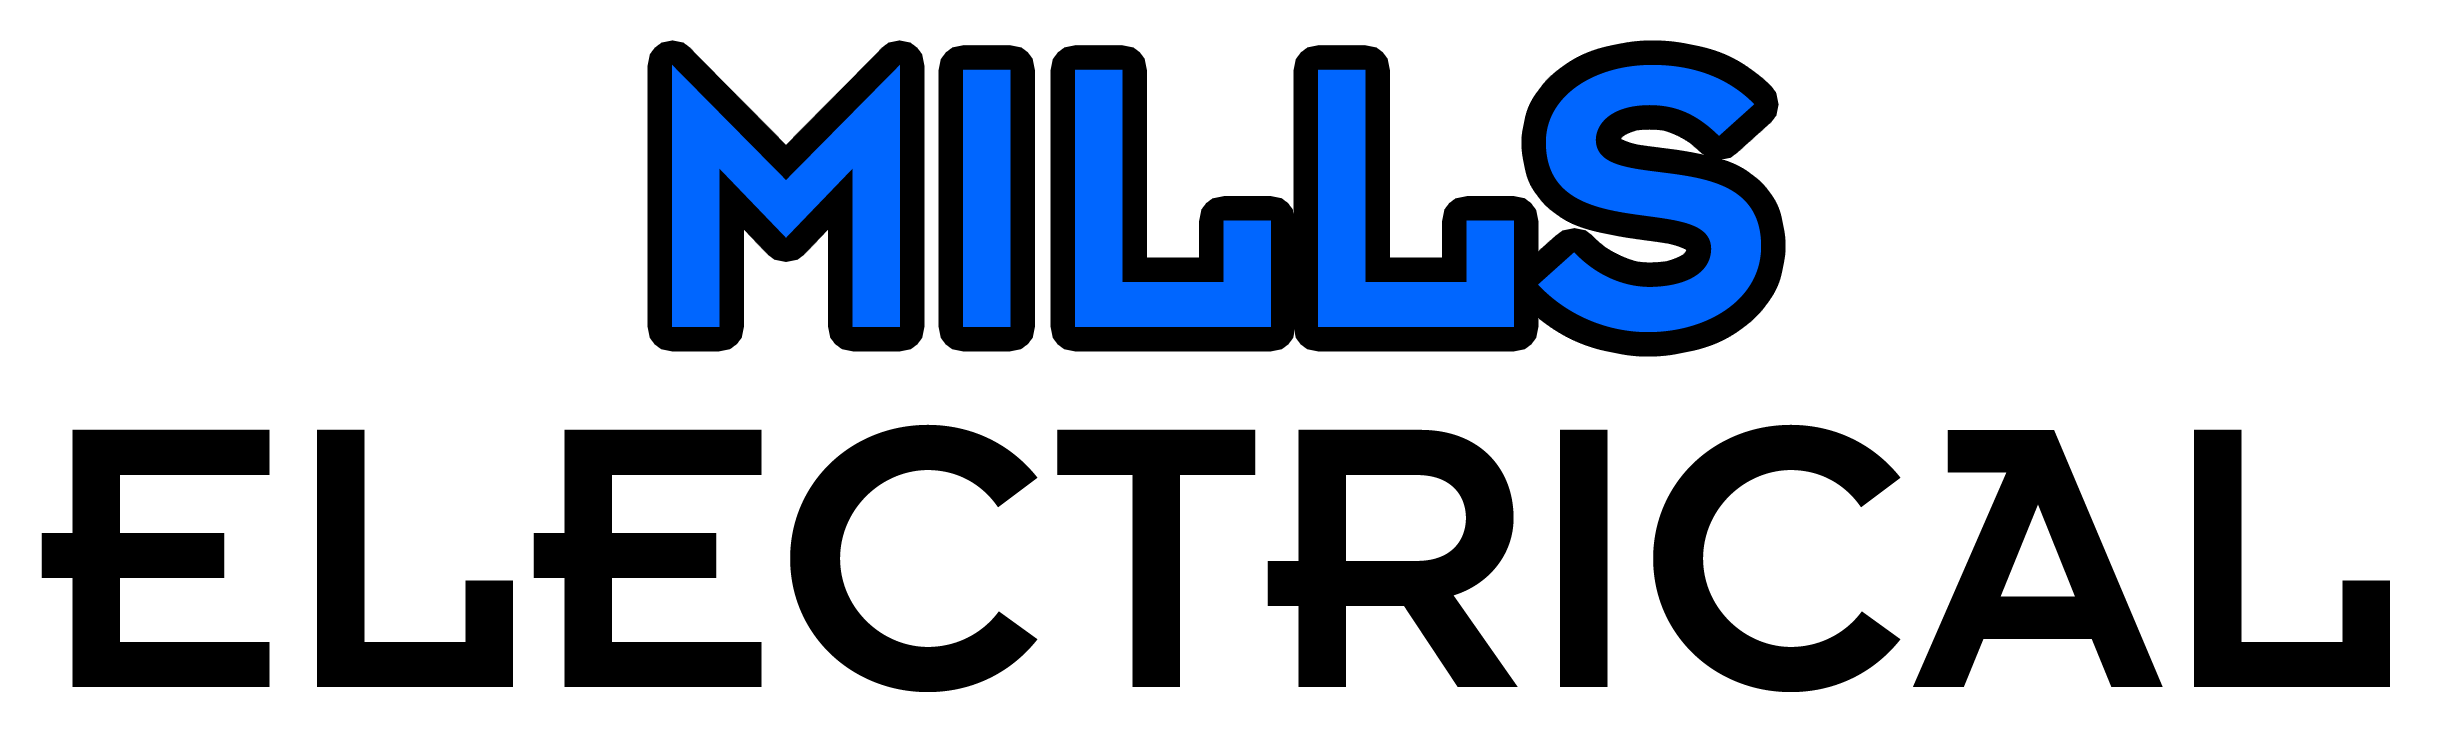 Mills Electrical